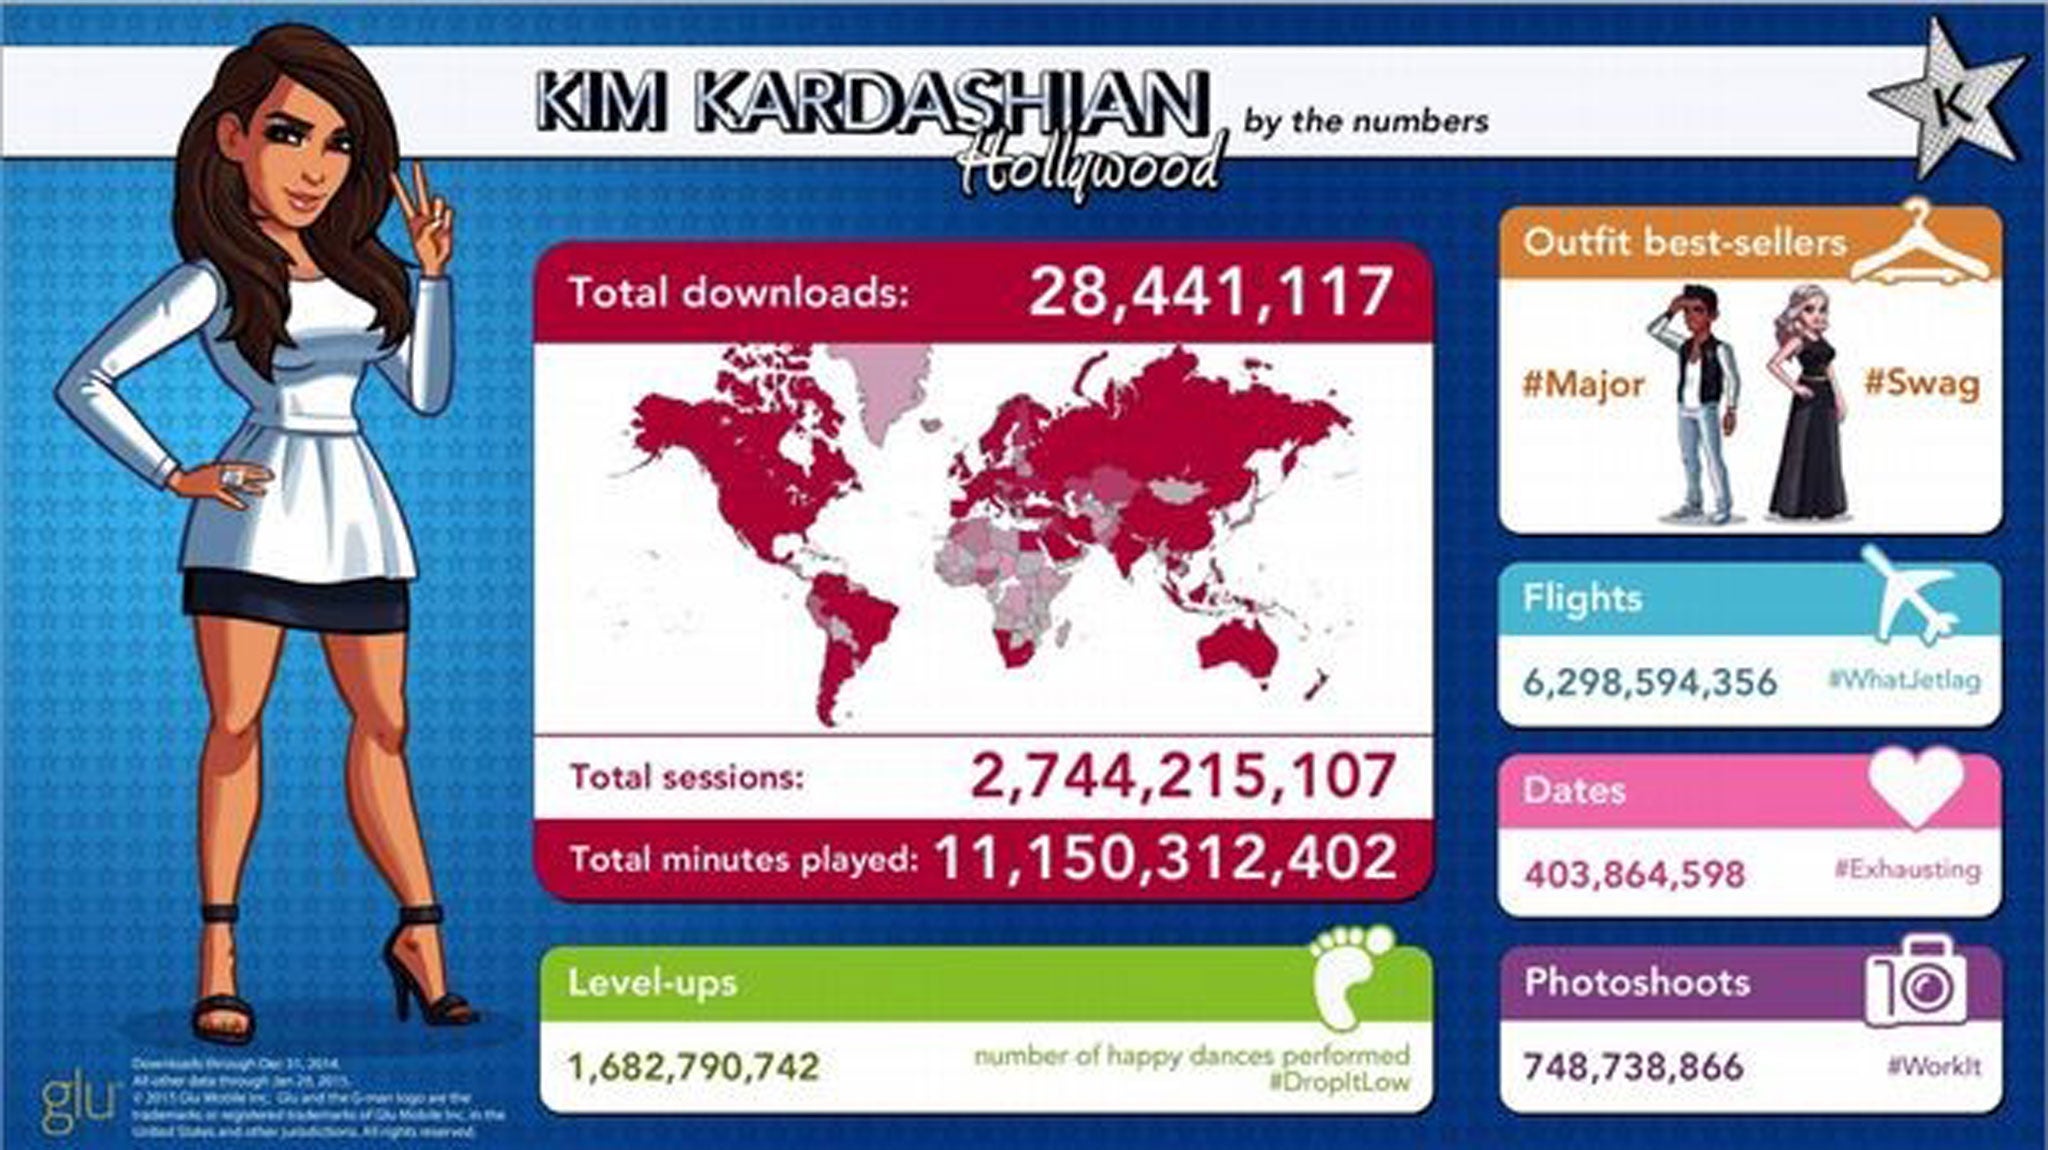 Kim Kardashian: Hollywood has made $127m (£86.8m) since it was released in June 2014